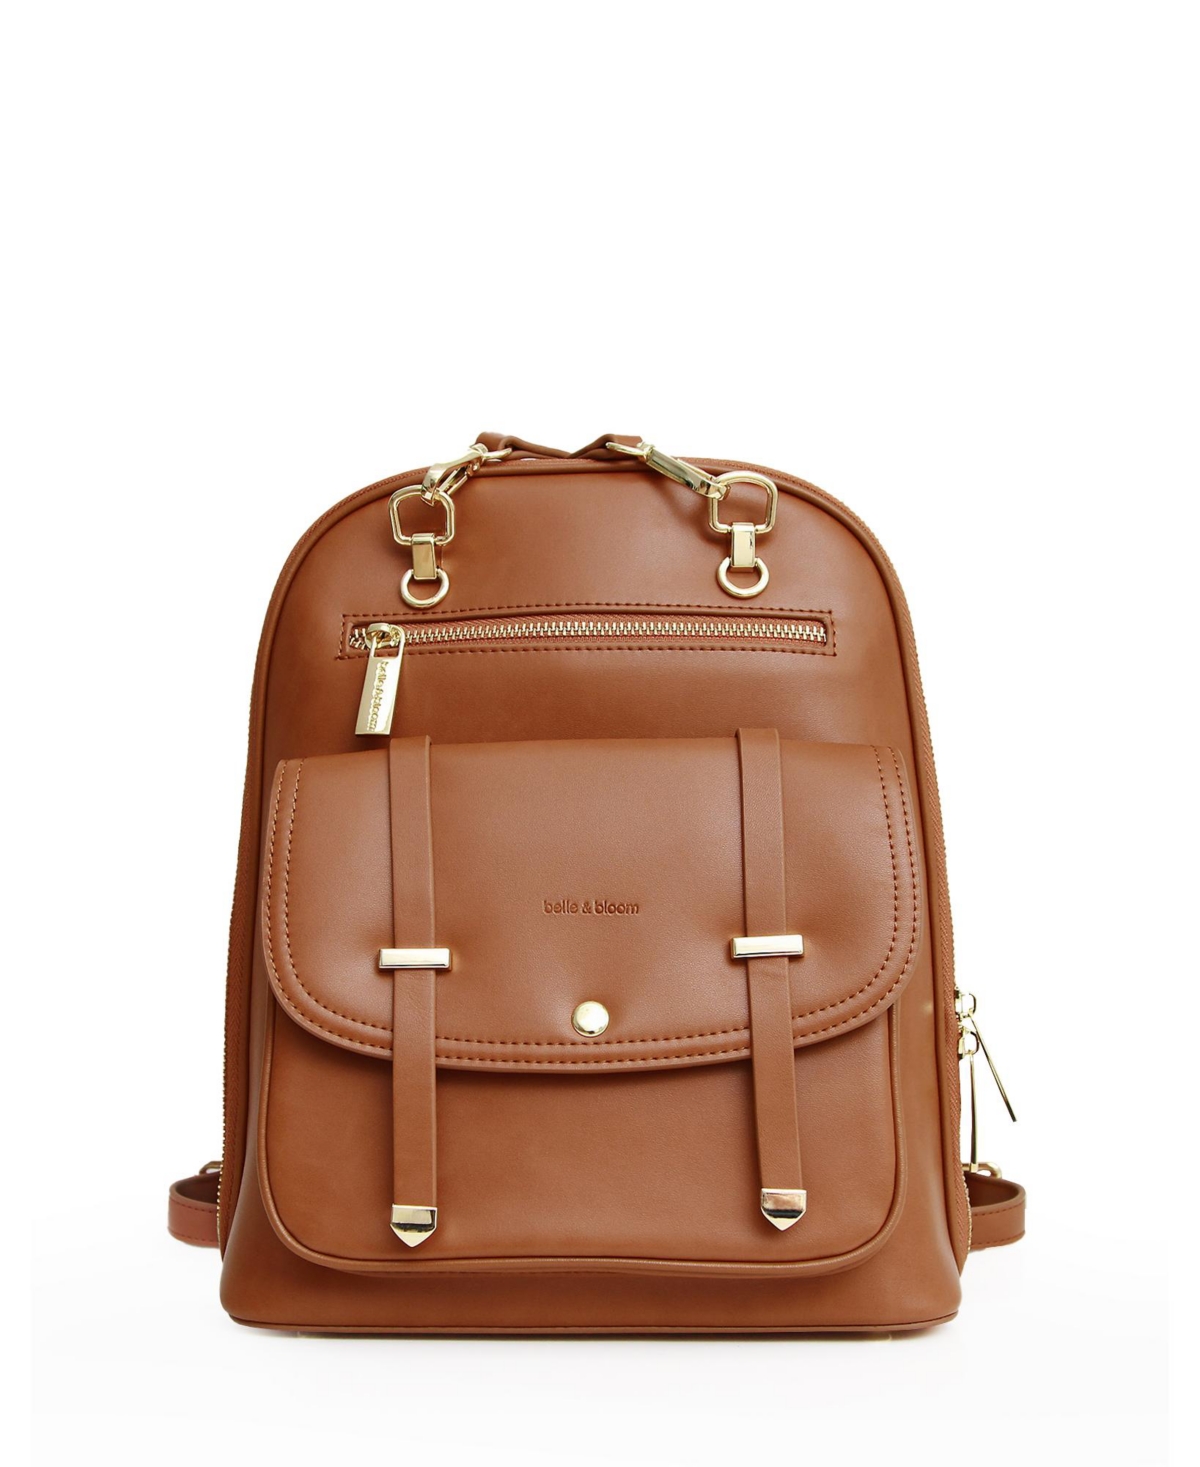 Women Belle & Bloom 5th Ave Leather Backpack - Camel